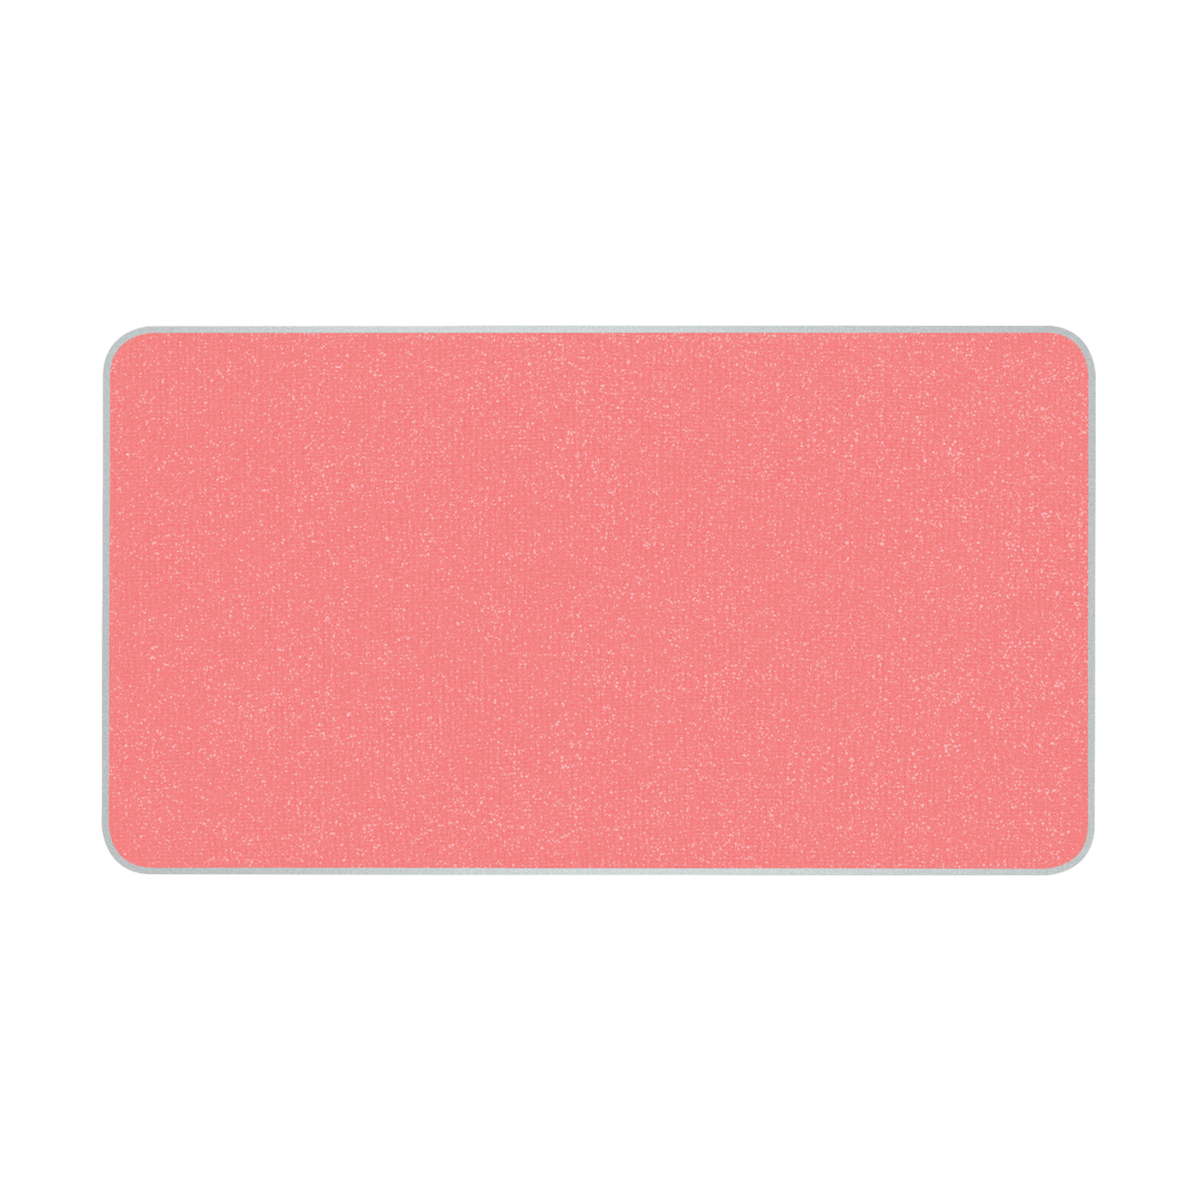 B210 Shimmery Warm Pink